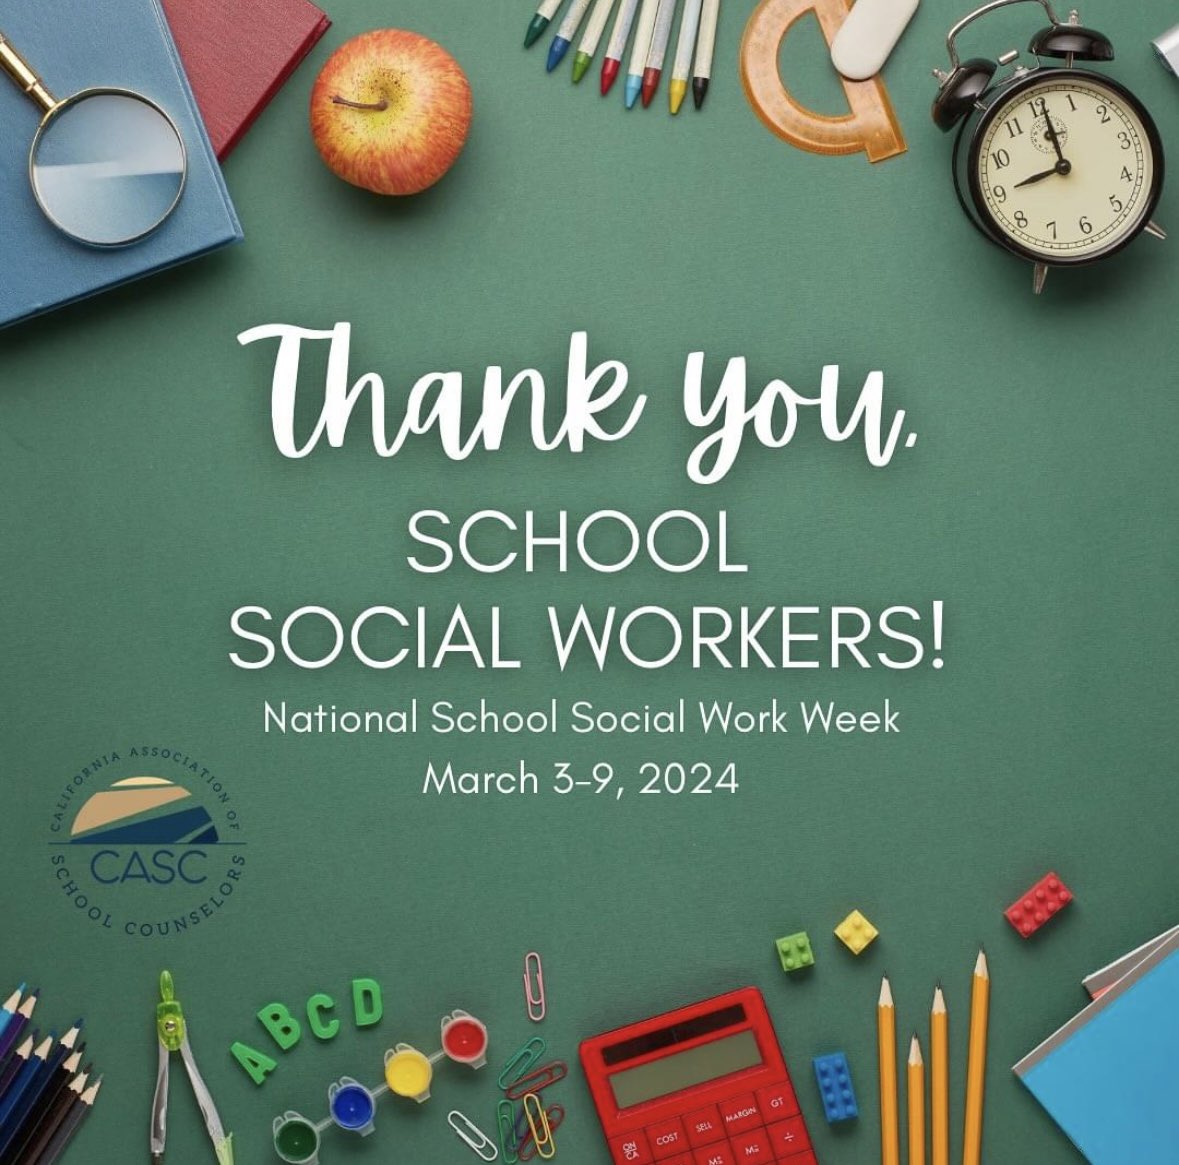 CASC appreciates and admires our fellow PPS service providers, school social workers! Thank you for your contributions to our education field supporting California students 🙌🏼 #mycasc